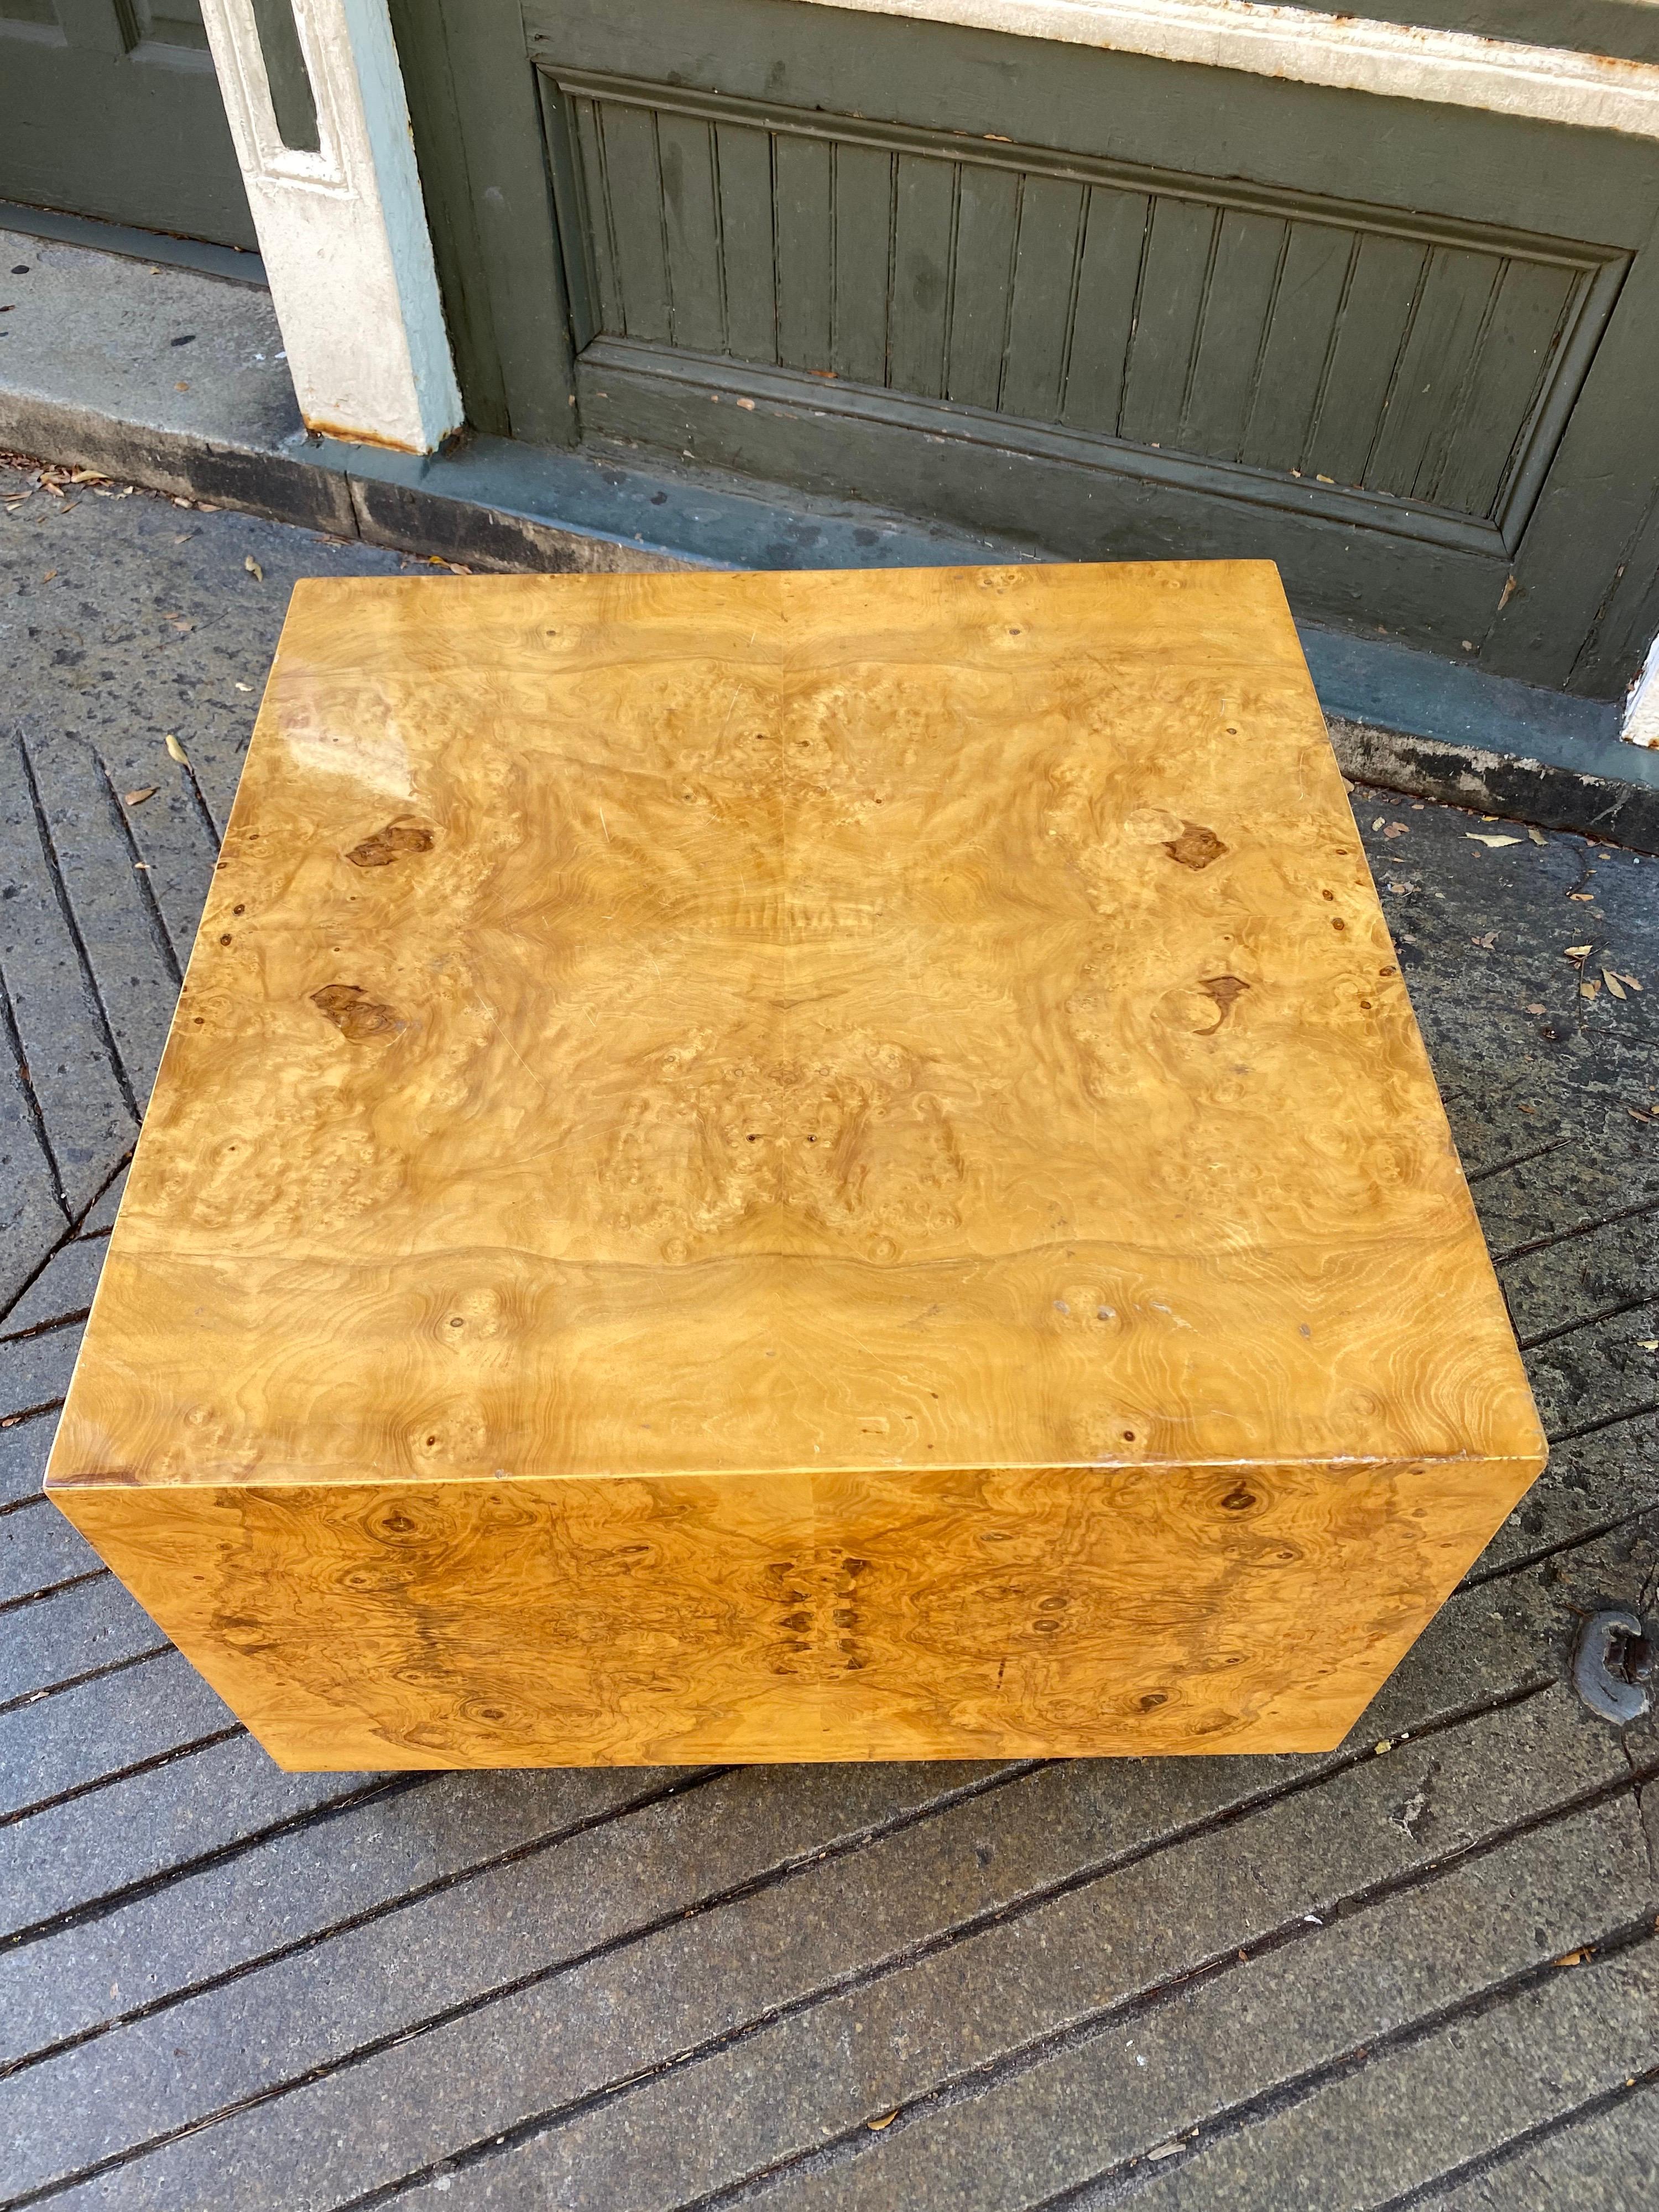 Burled wood cube table. Very expressive and unique burled olive wood. Nice size, measuring 29